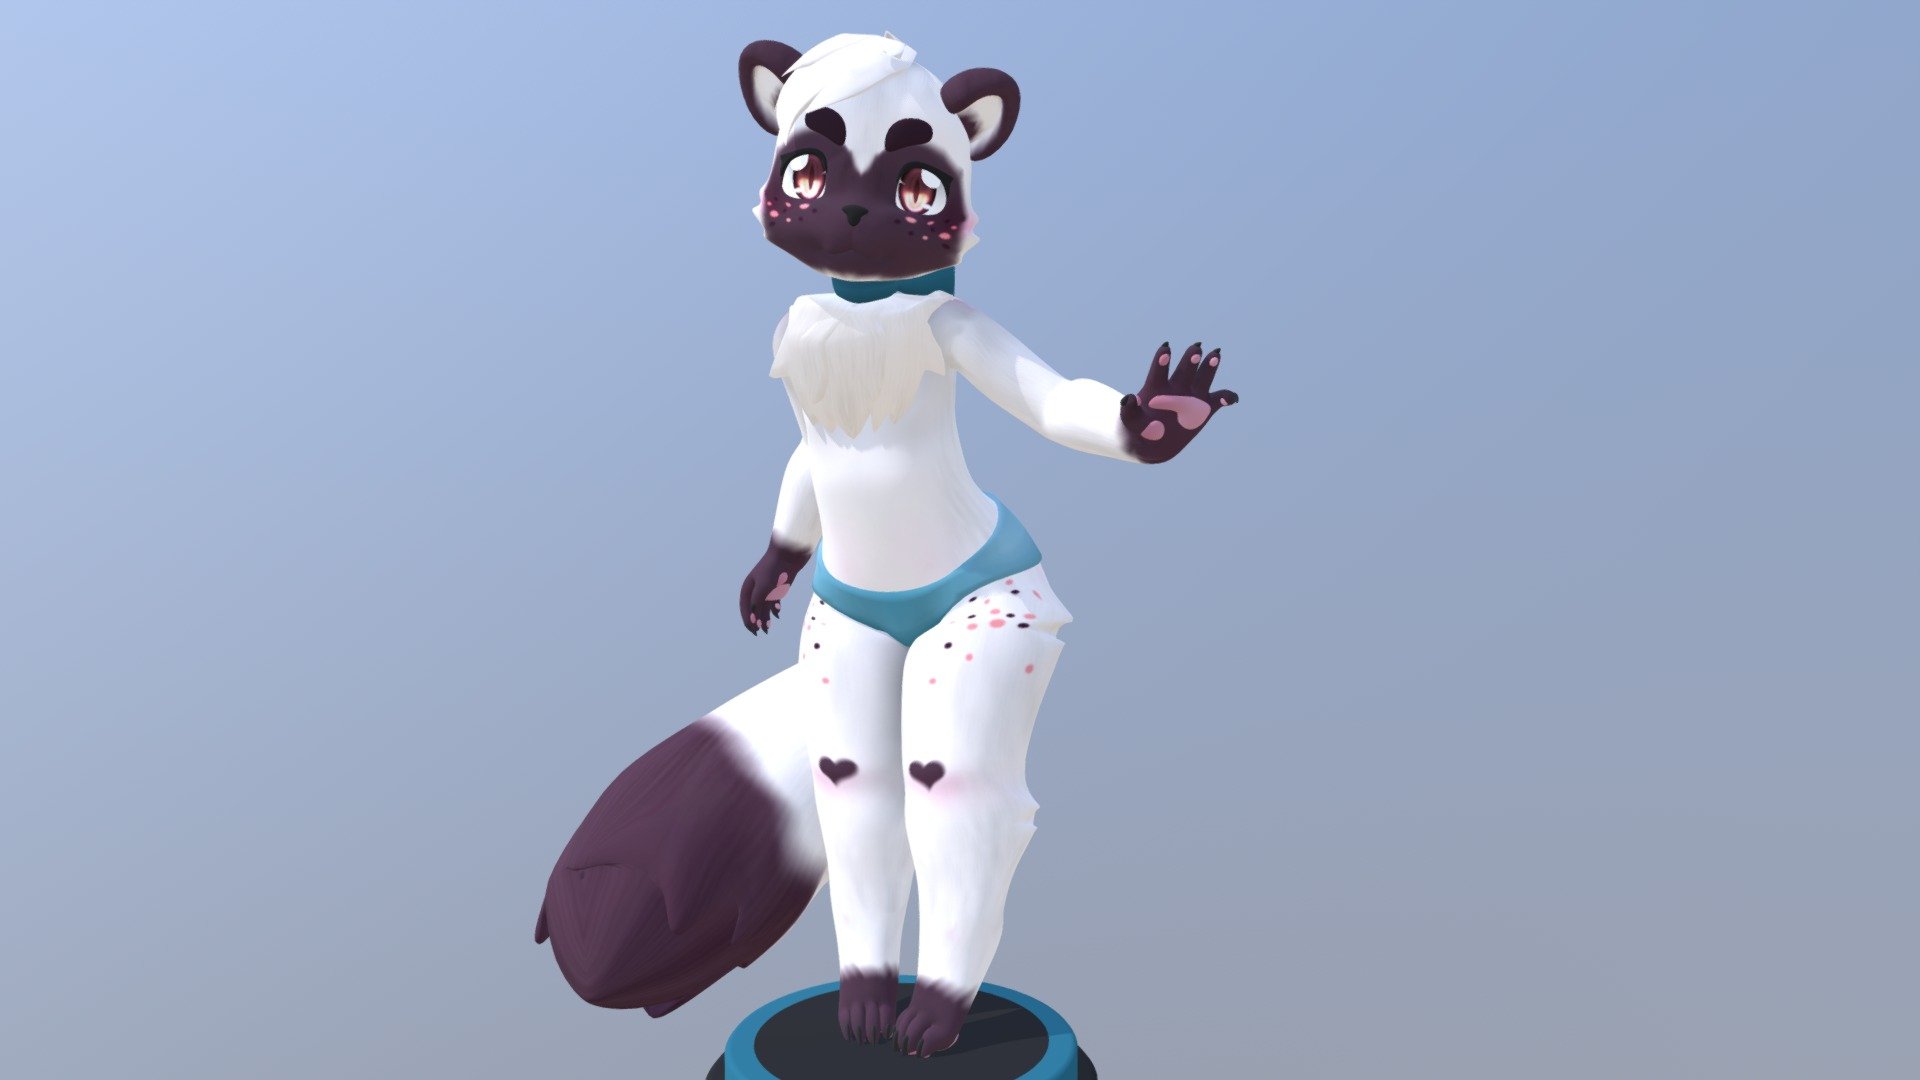 Comission to @Jacob_koch
Commissions: https://www.furaffinity.net/commissions/hickysnow/ - Ciabatta - 3D model by HickySnow (@Hicky_Snow) 3d model